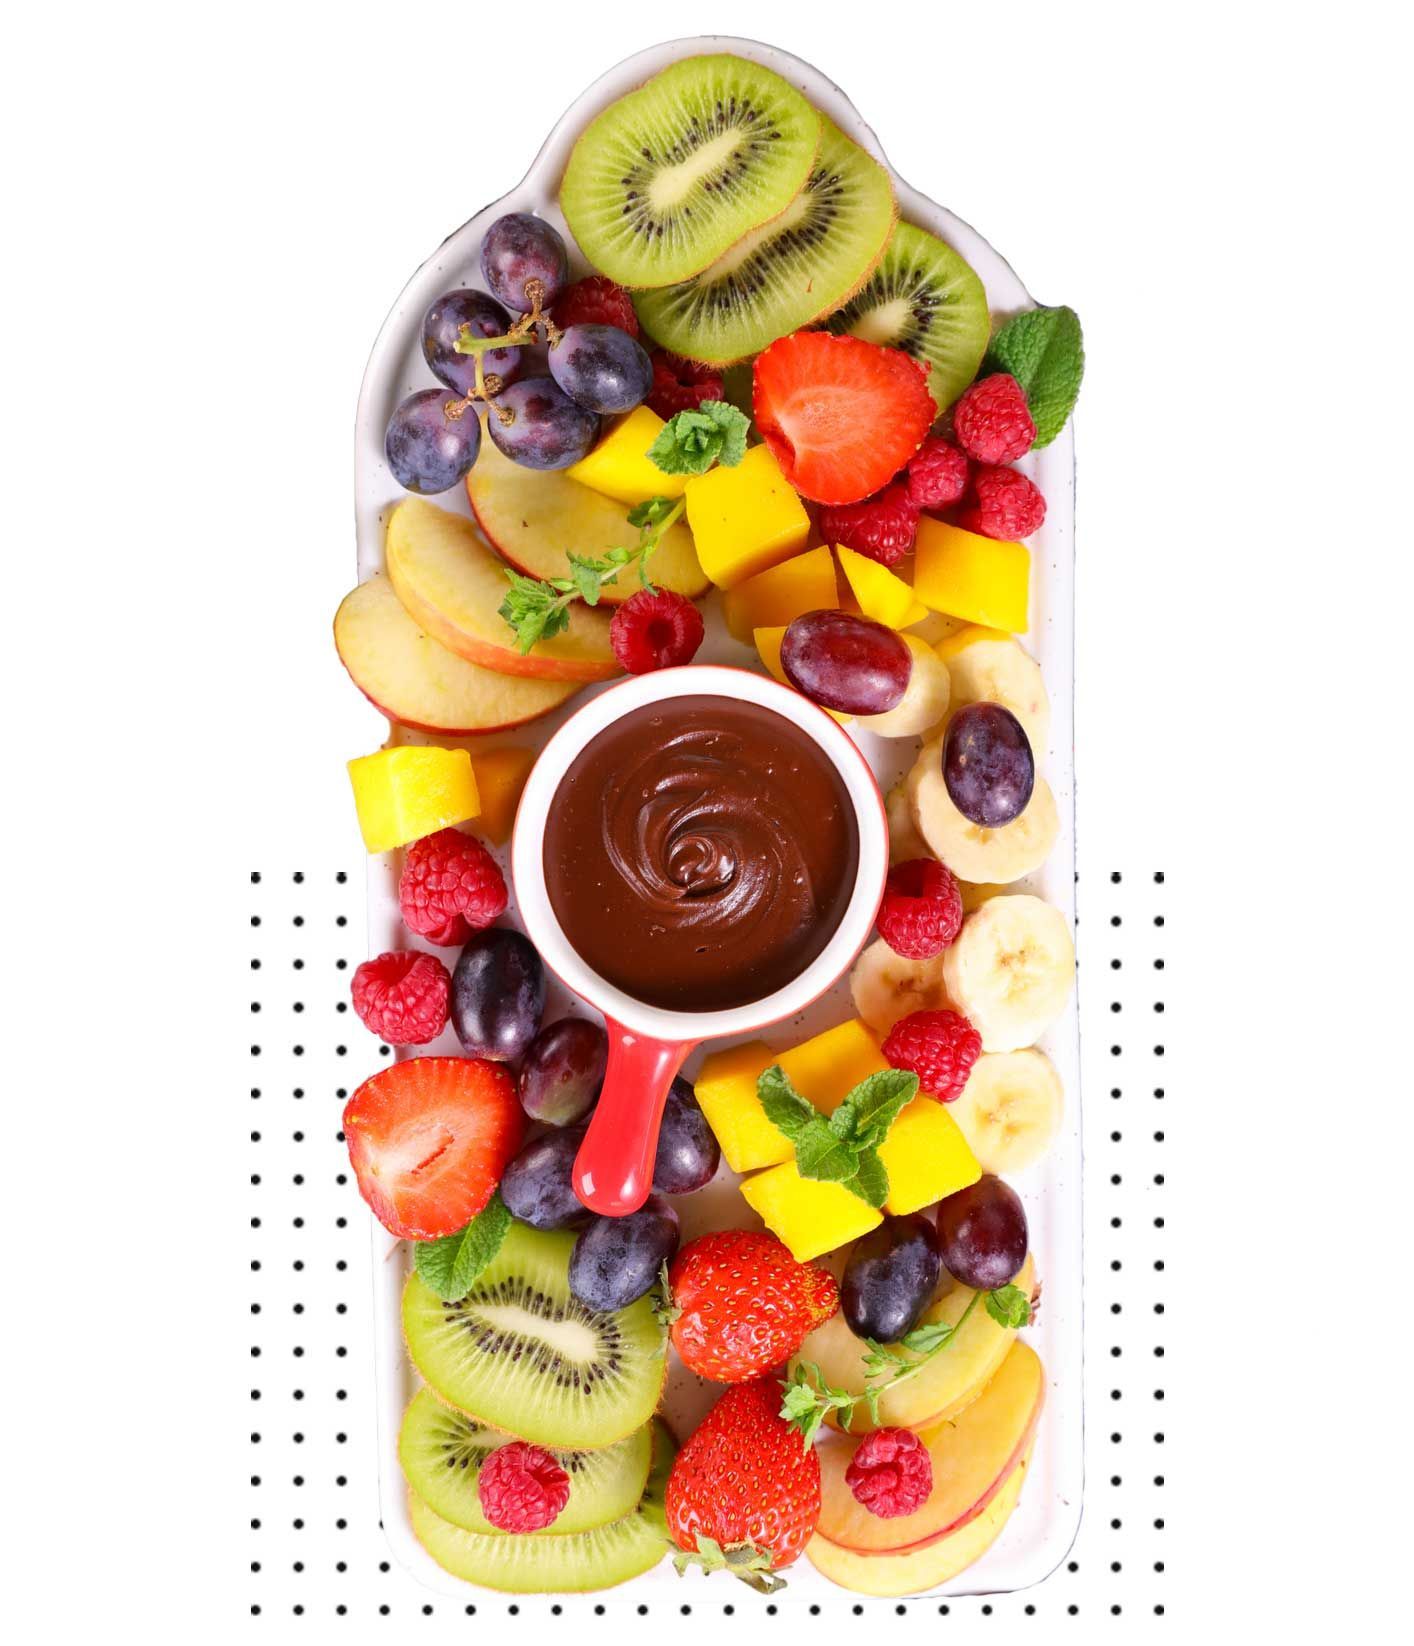 A white plate topped with sliced fruit and a cup of chocolate sauce.